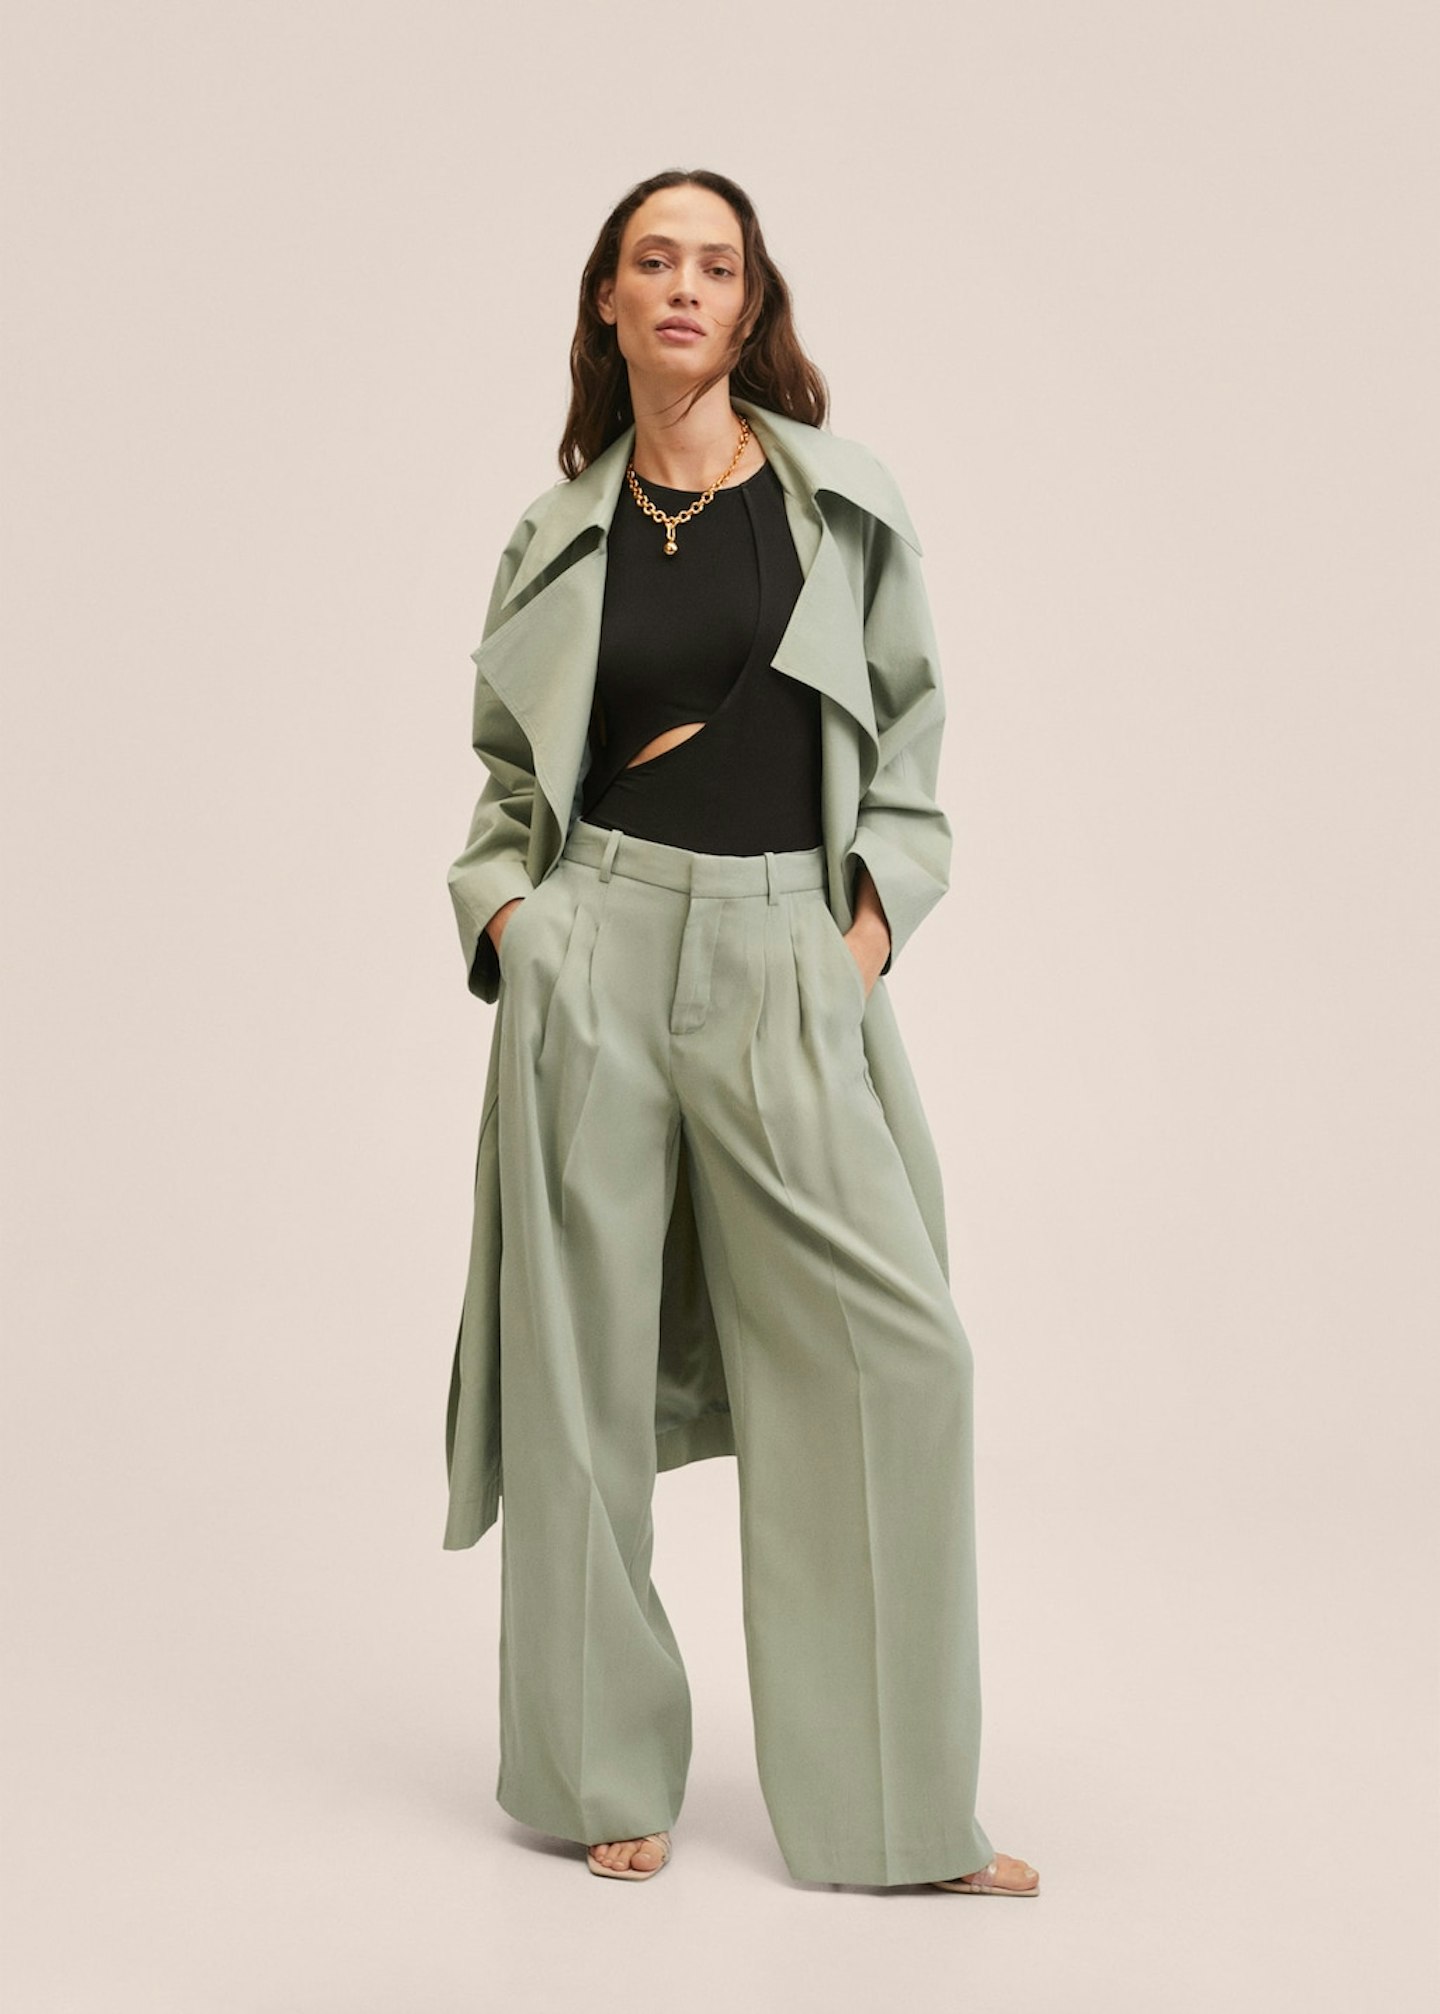 Lunchtime Shop Monday – Mango, Wideleg Pleated Trousers, £49.99